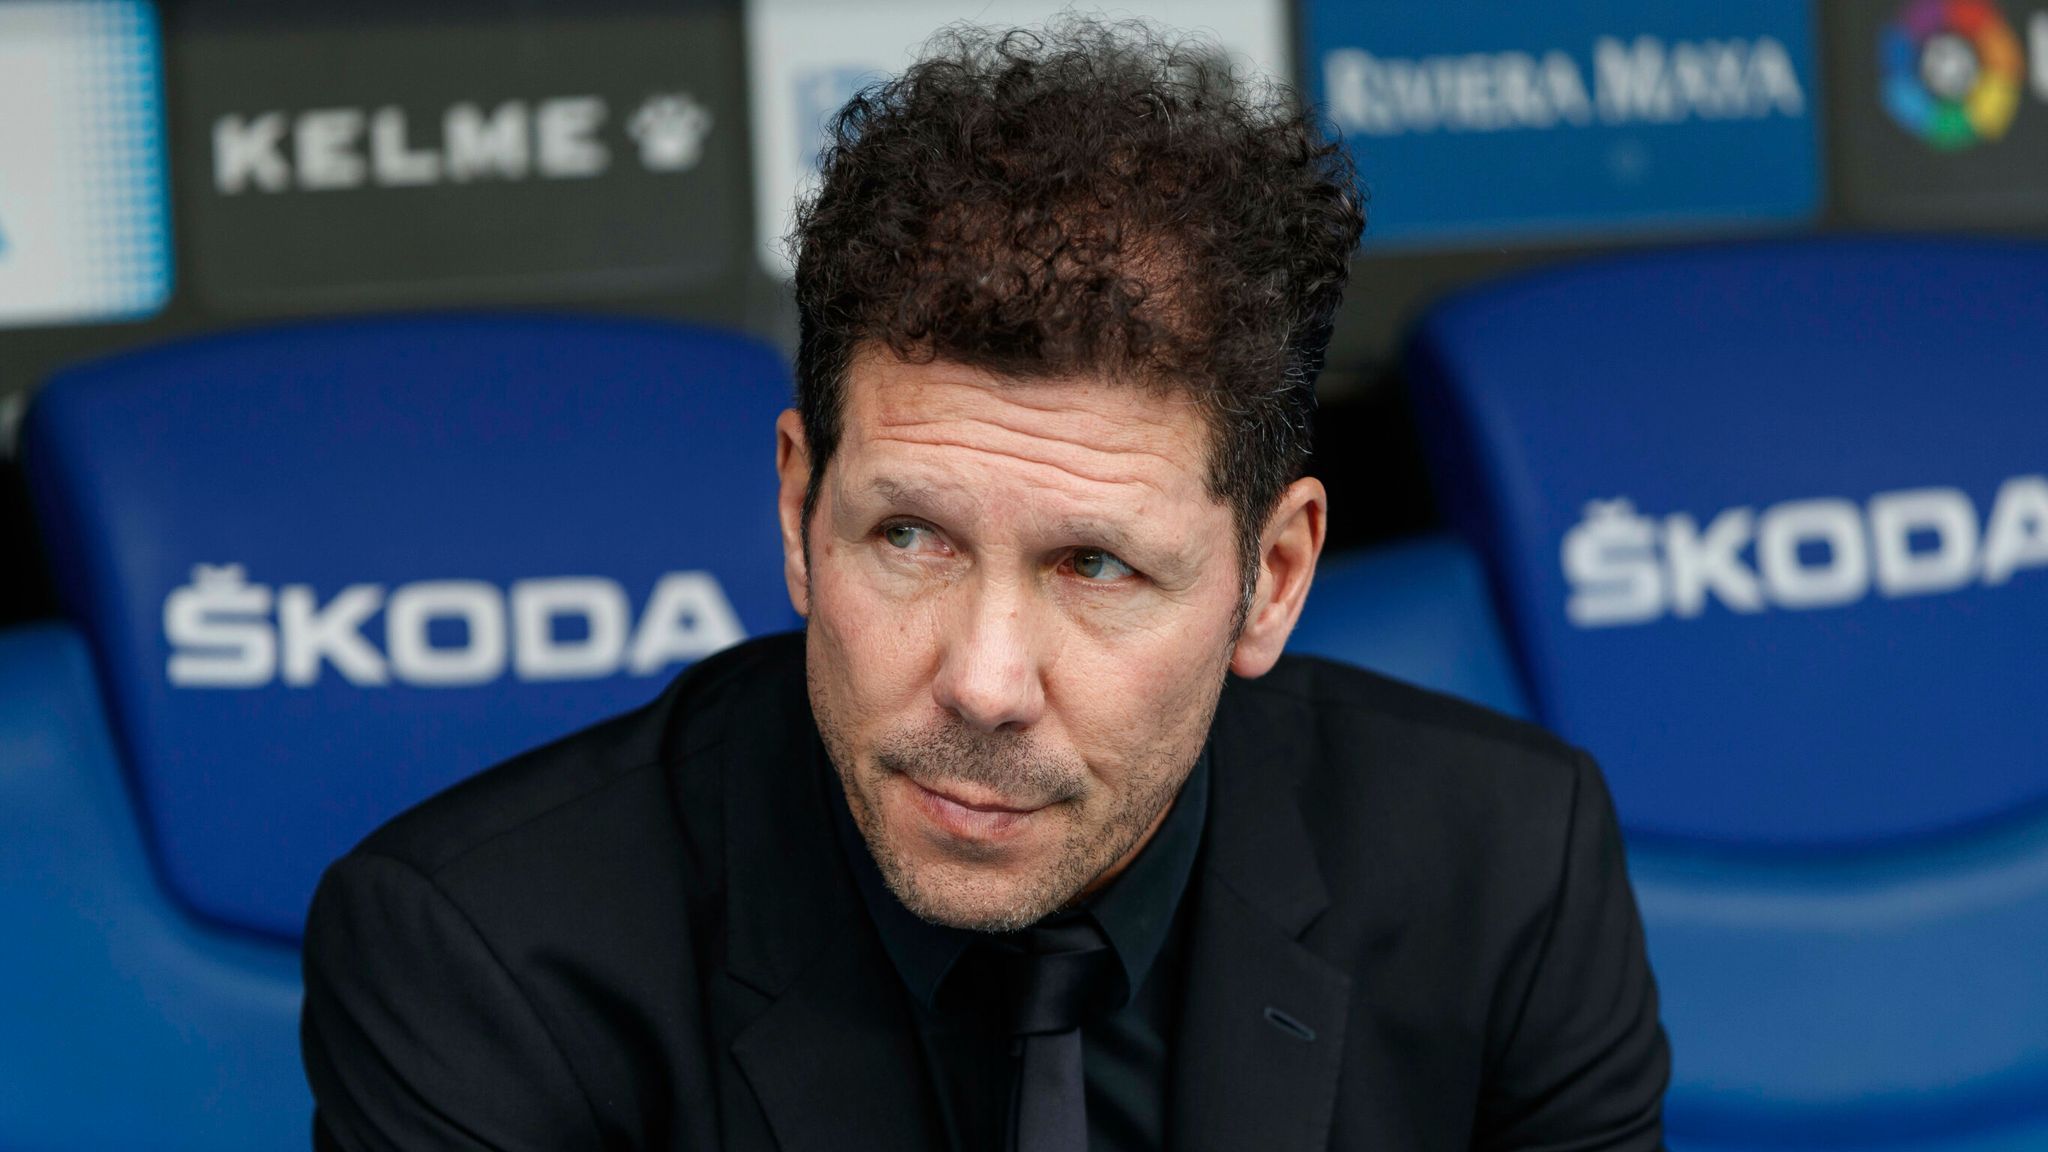 Simeone is highest paid football coach in the world according to L'Equipe